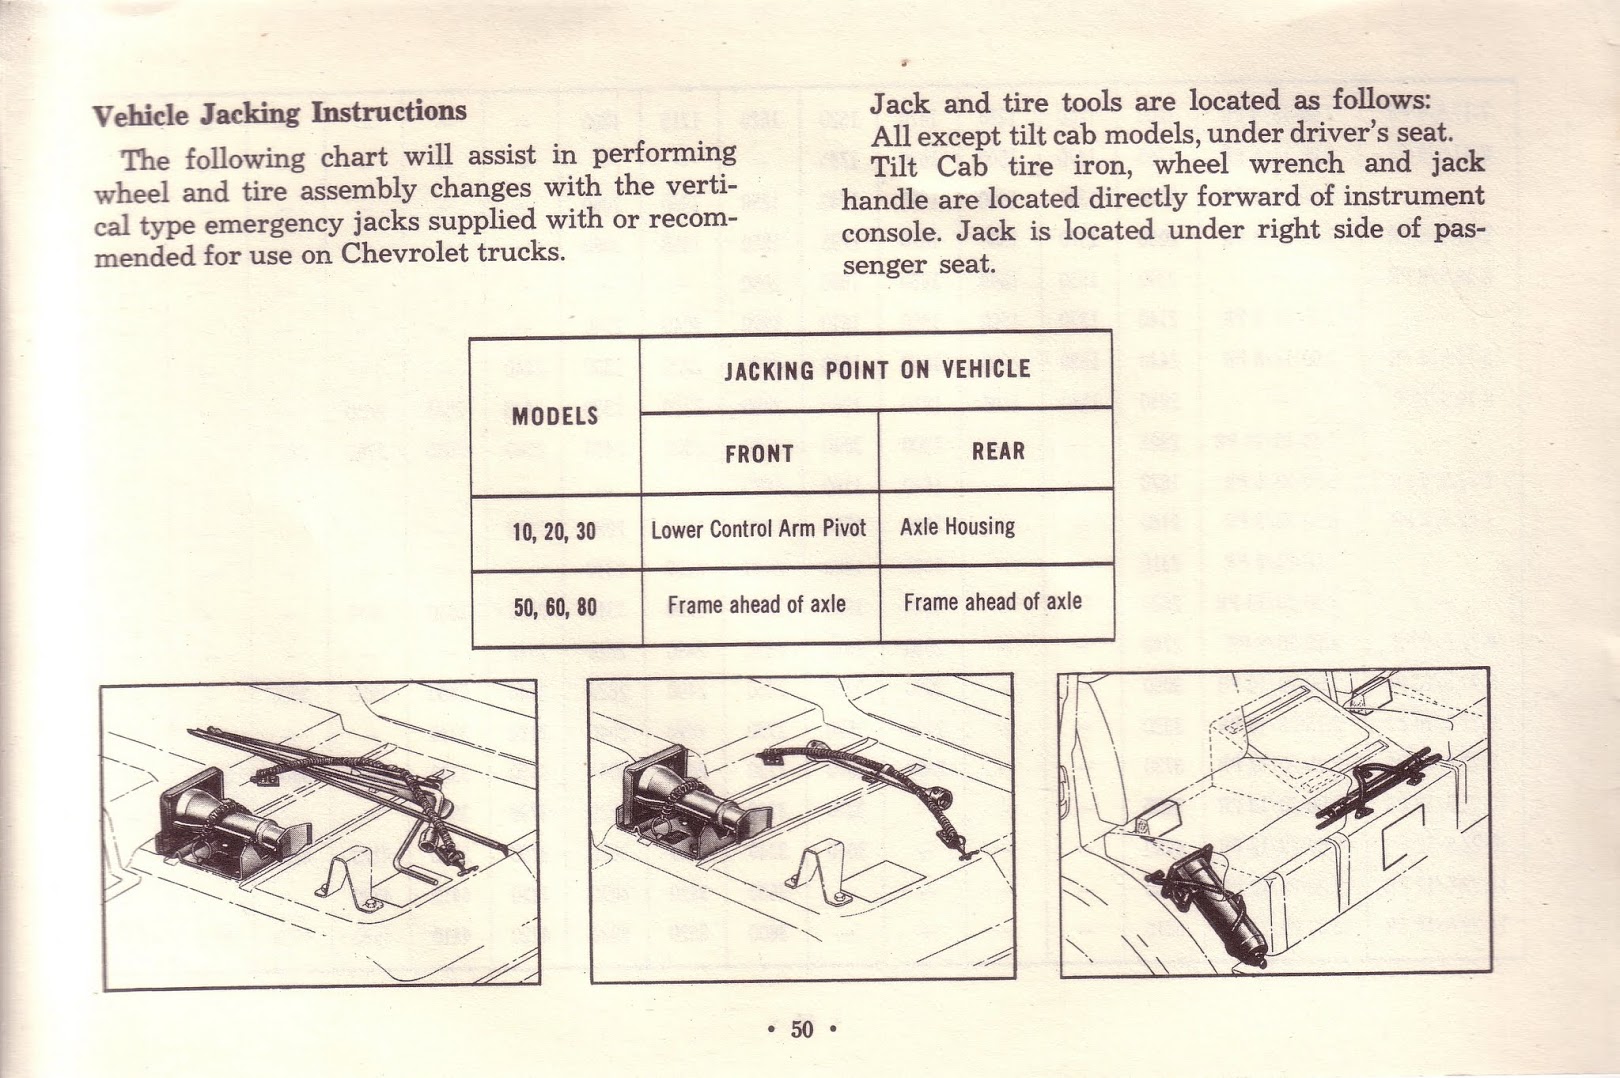 1963_Chevrolet_Truck_Owners_Guide-50